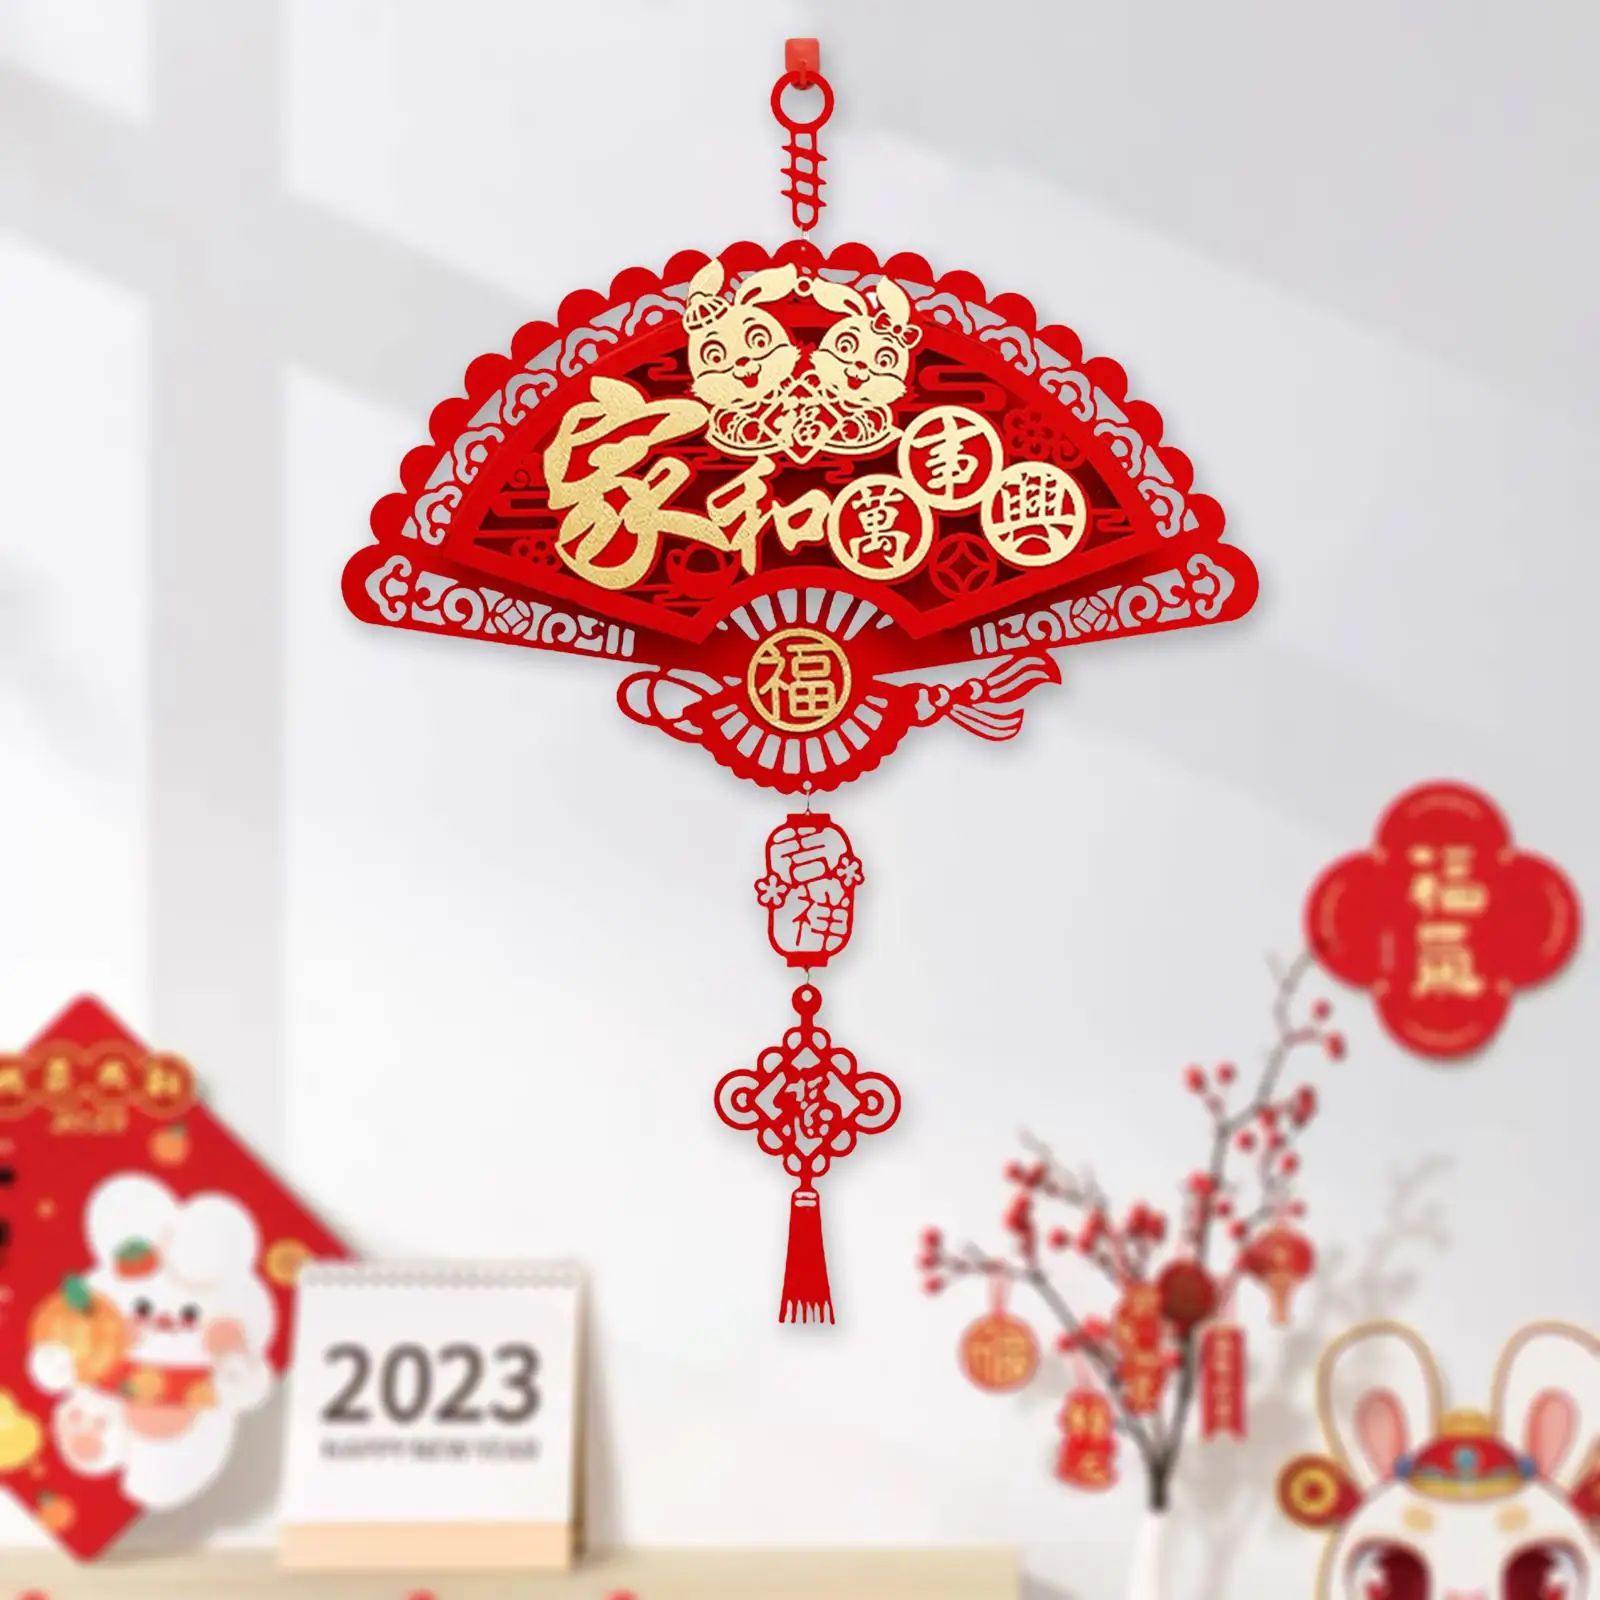 Traditional Chinese New Year Decorations Hanging Ornaments Tassel Charm 2023 Rabbit Year for Office Home Decorative